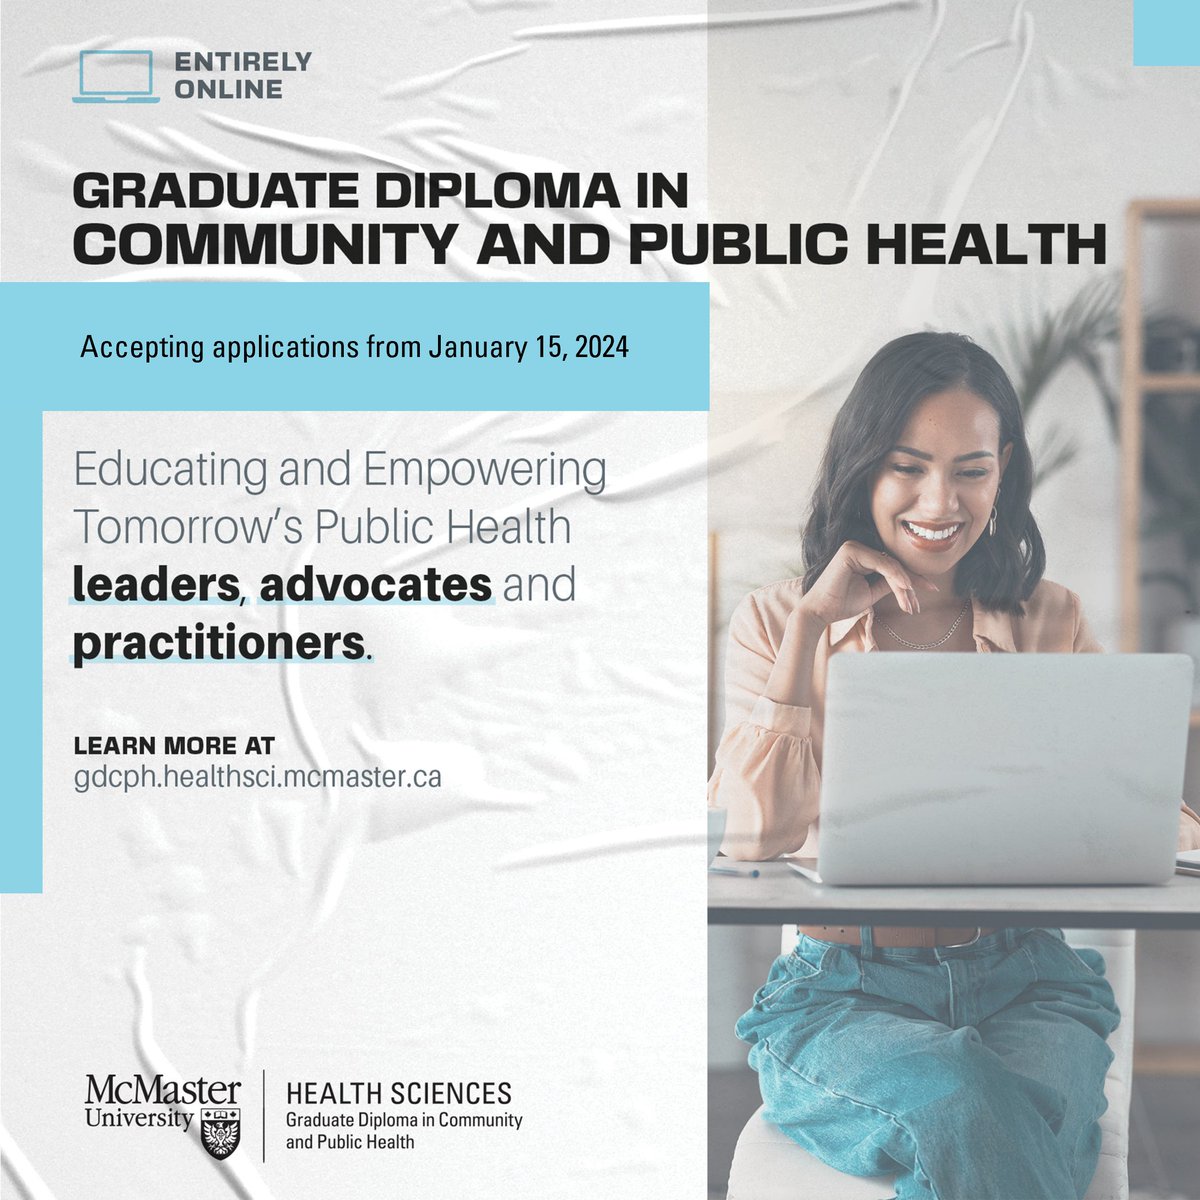 Find out more about our fully online diploma program at our Admissions Webinar on February 6th, 2024 at 12pm with Program Director @AndersonLauraN RSVP to gdcph@mcmaster.ca #publichealth #graduatestudents #communityhealth